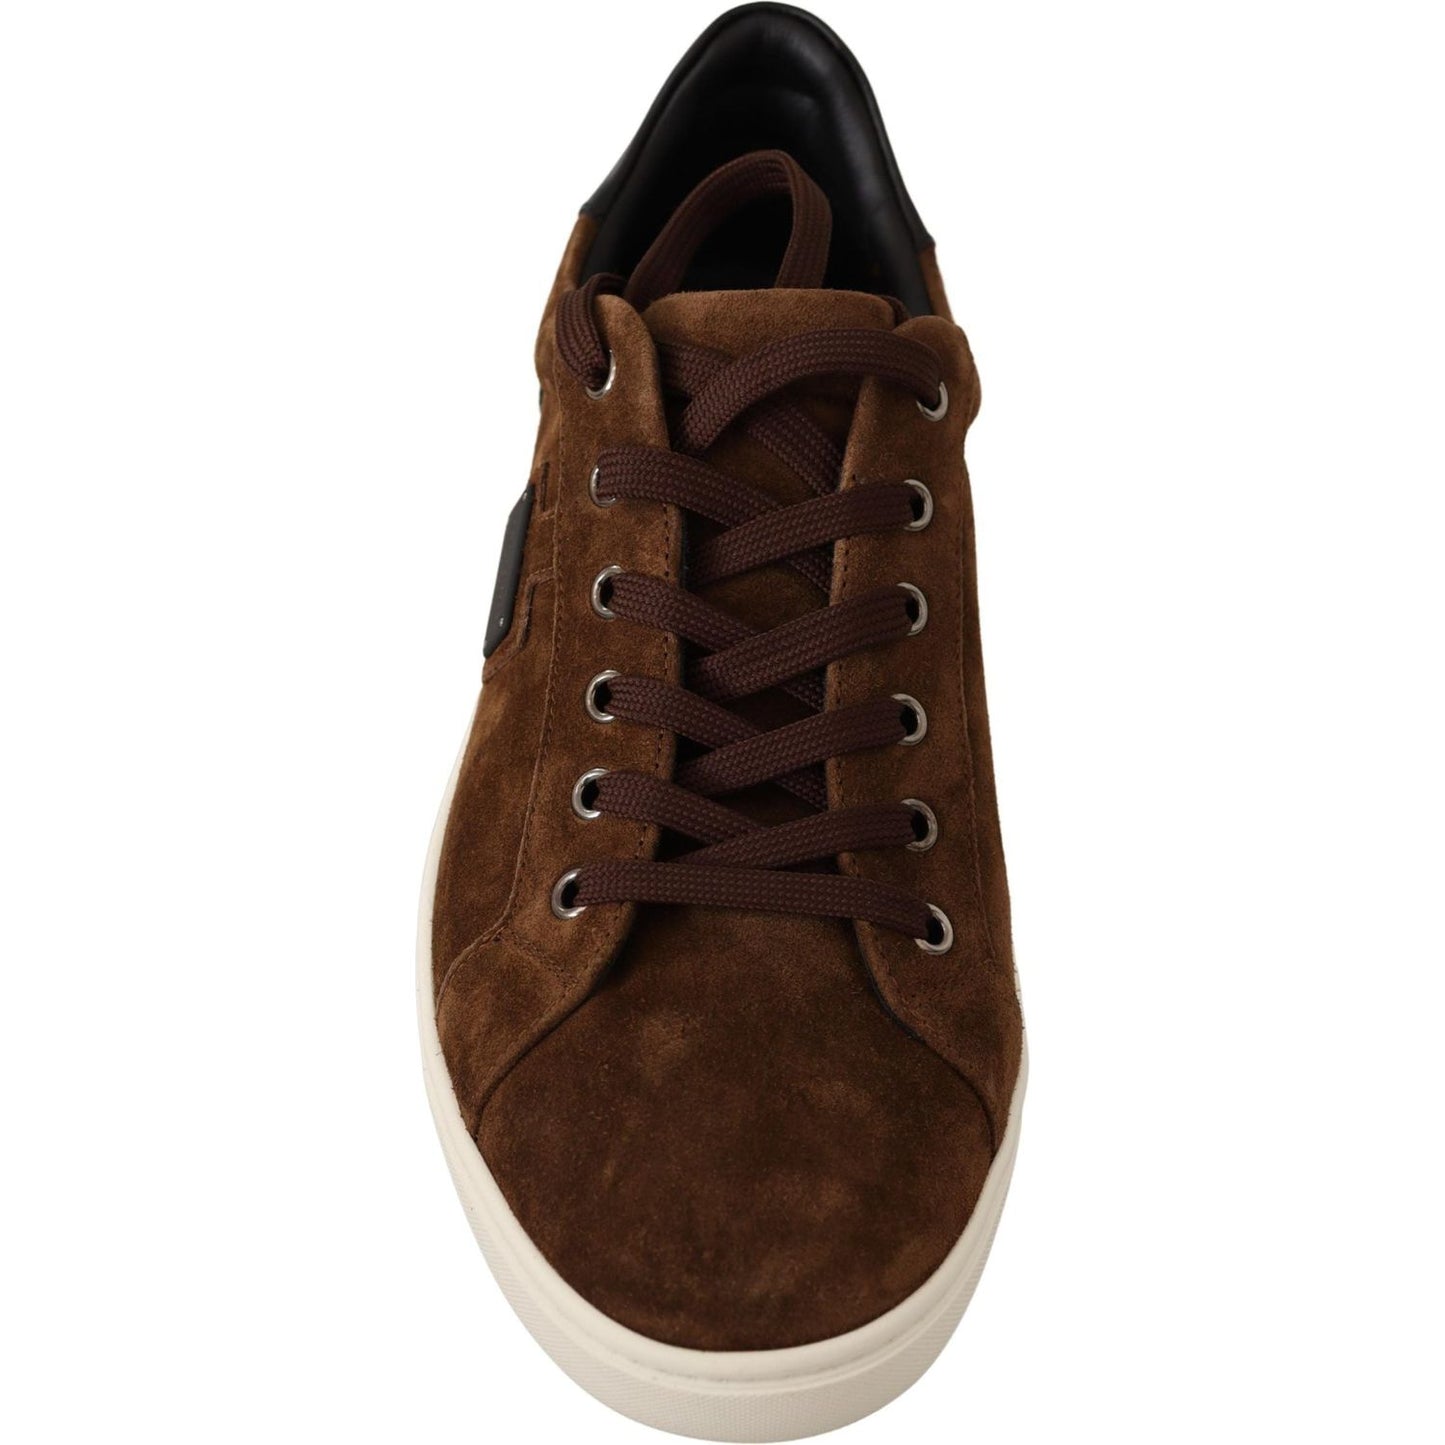 Dolce & Gabbana Elegant Leather Casual Sneakers in Brown brown-suede-leather-mens-low-tops-sneakers